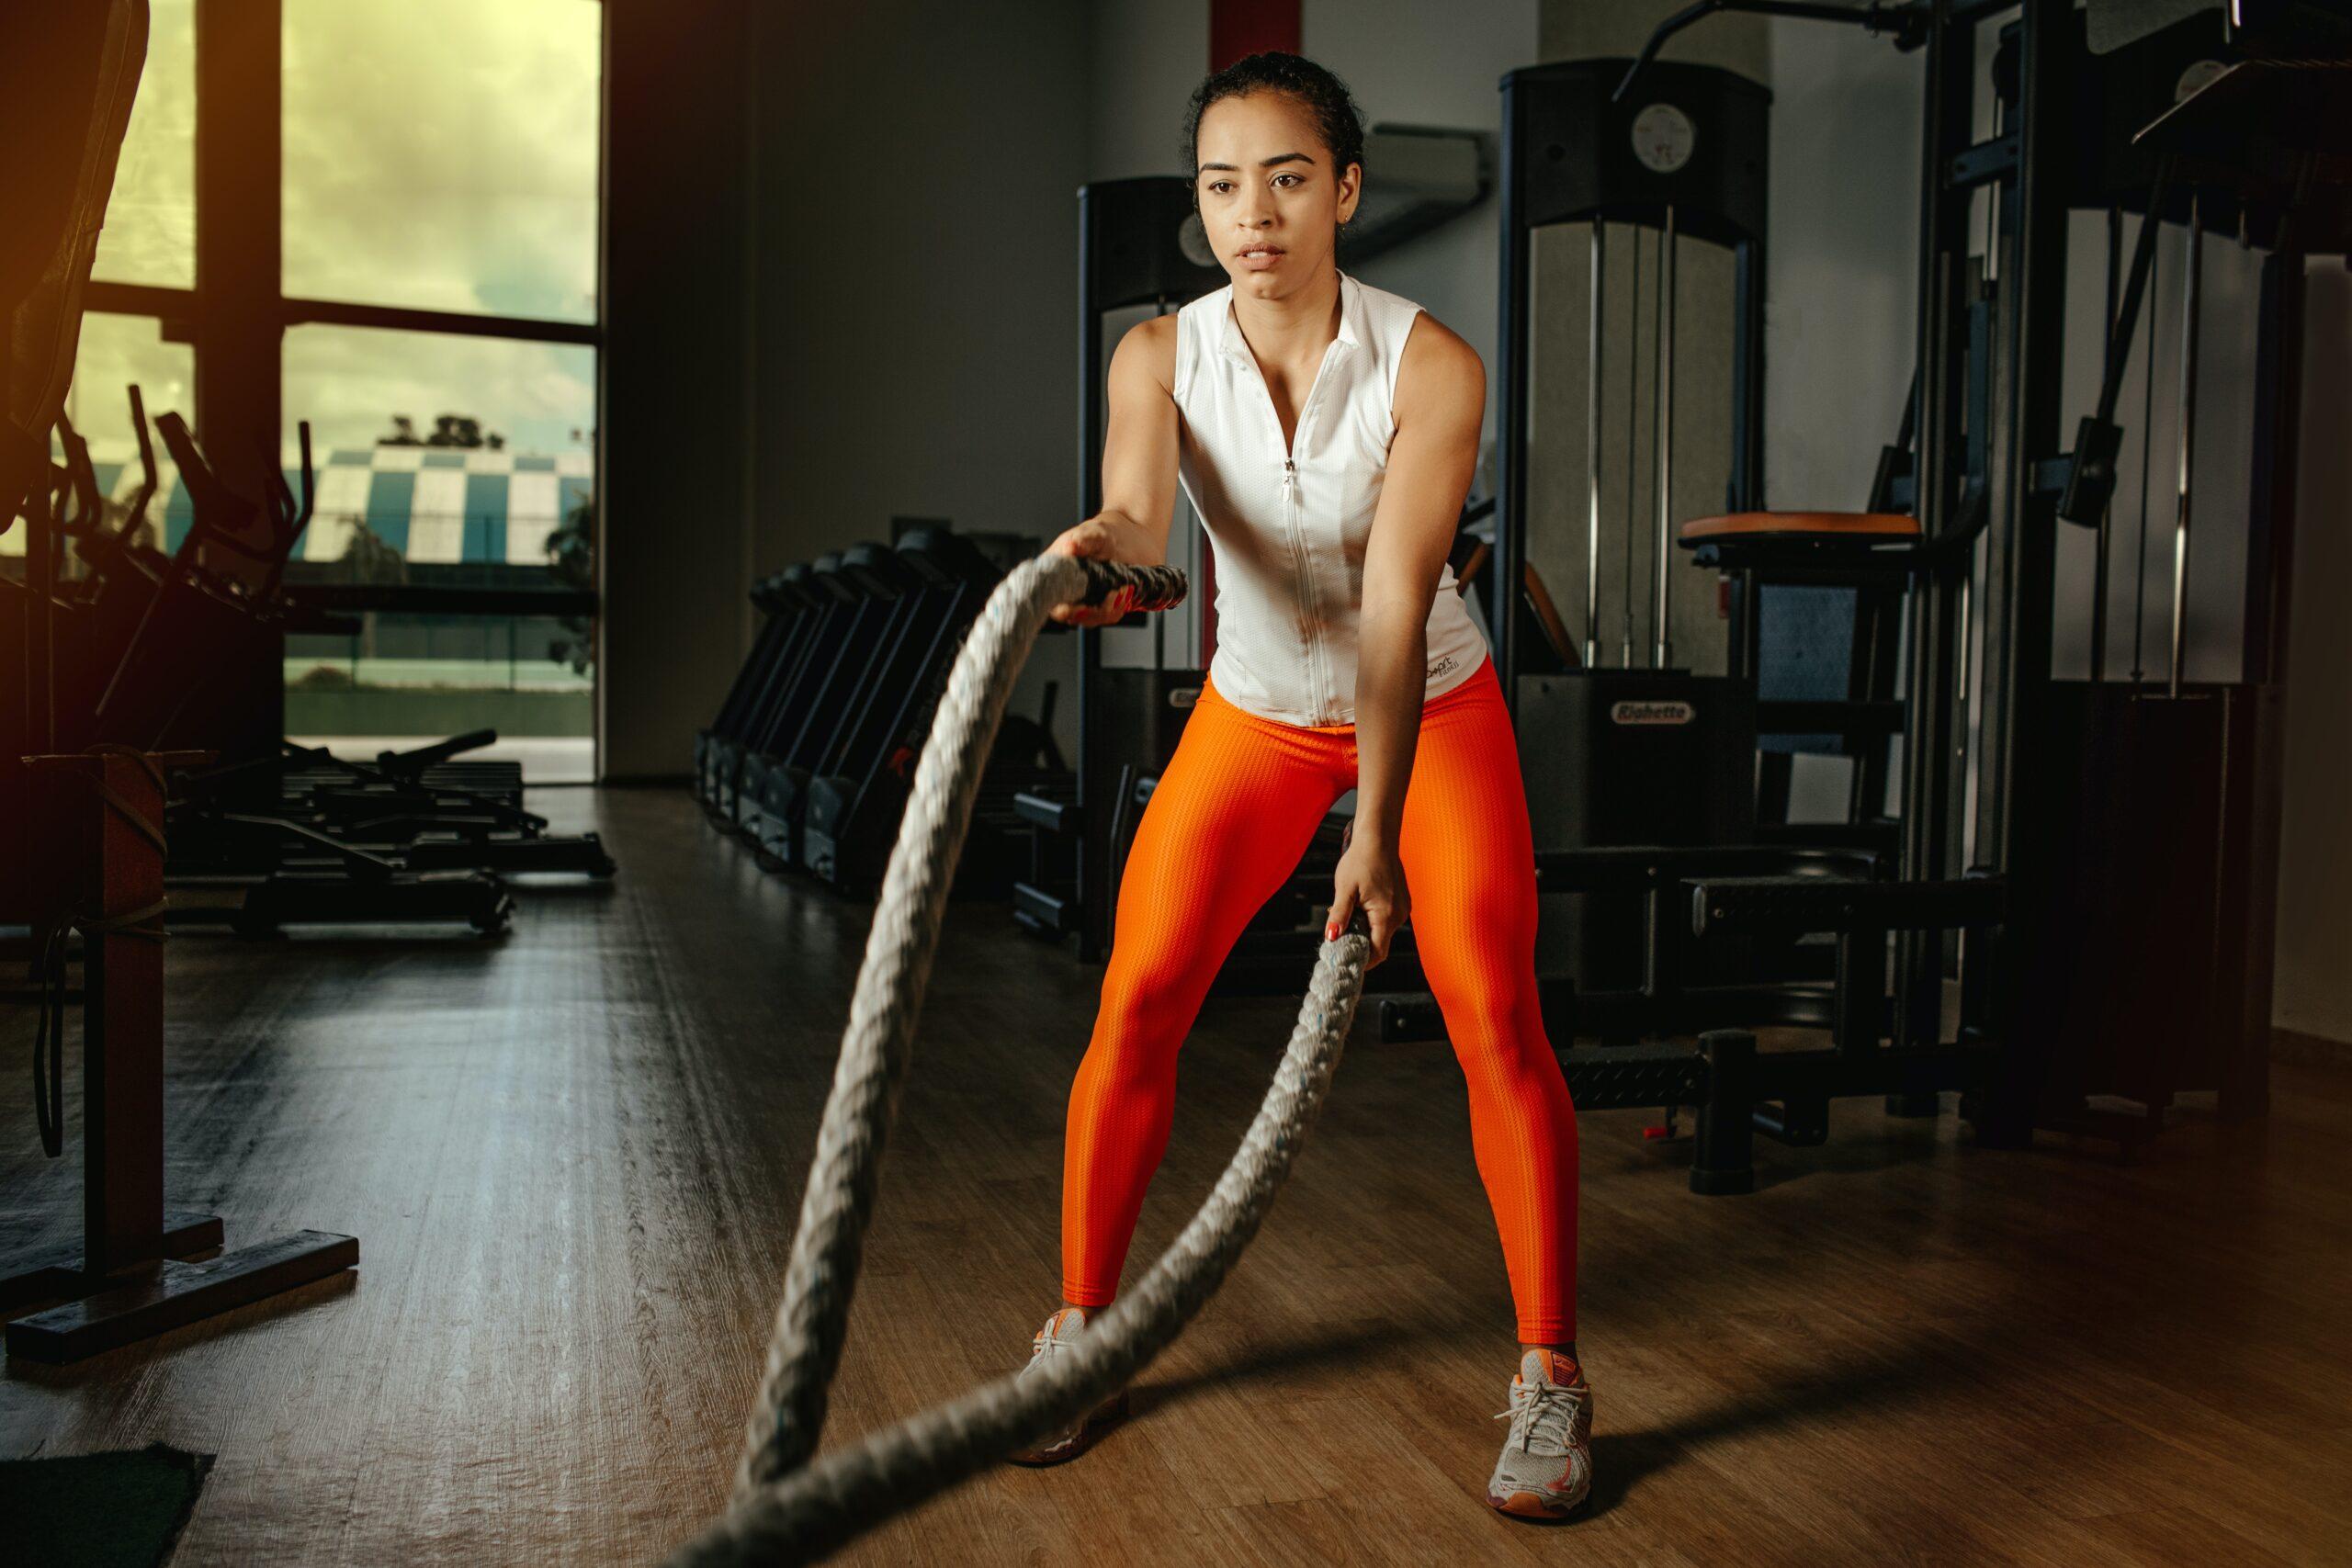 A focused woman in a white sleeveless top and orange leggings exercises with battle ropes in a gym, with gym equipment in the background.